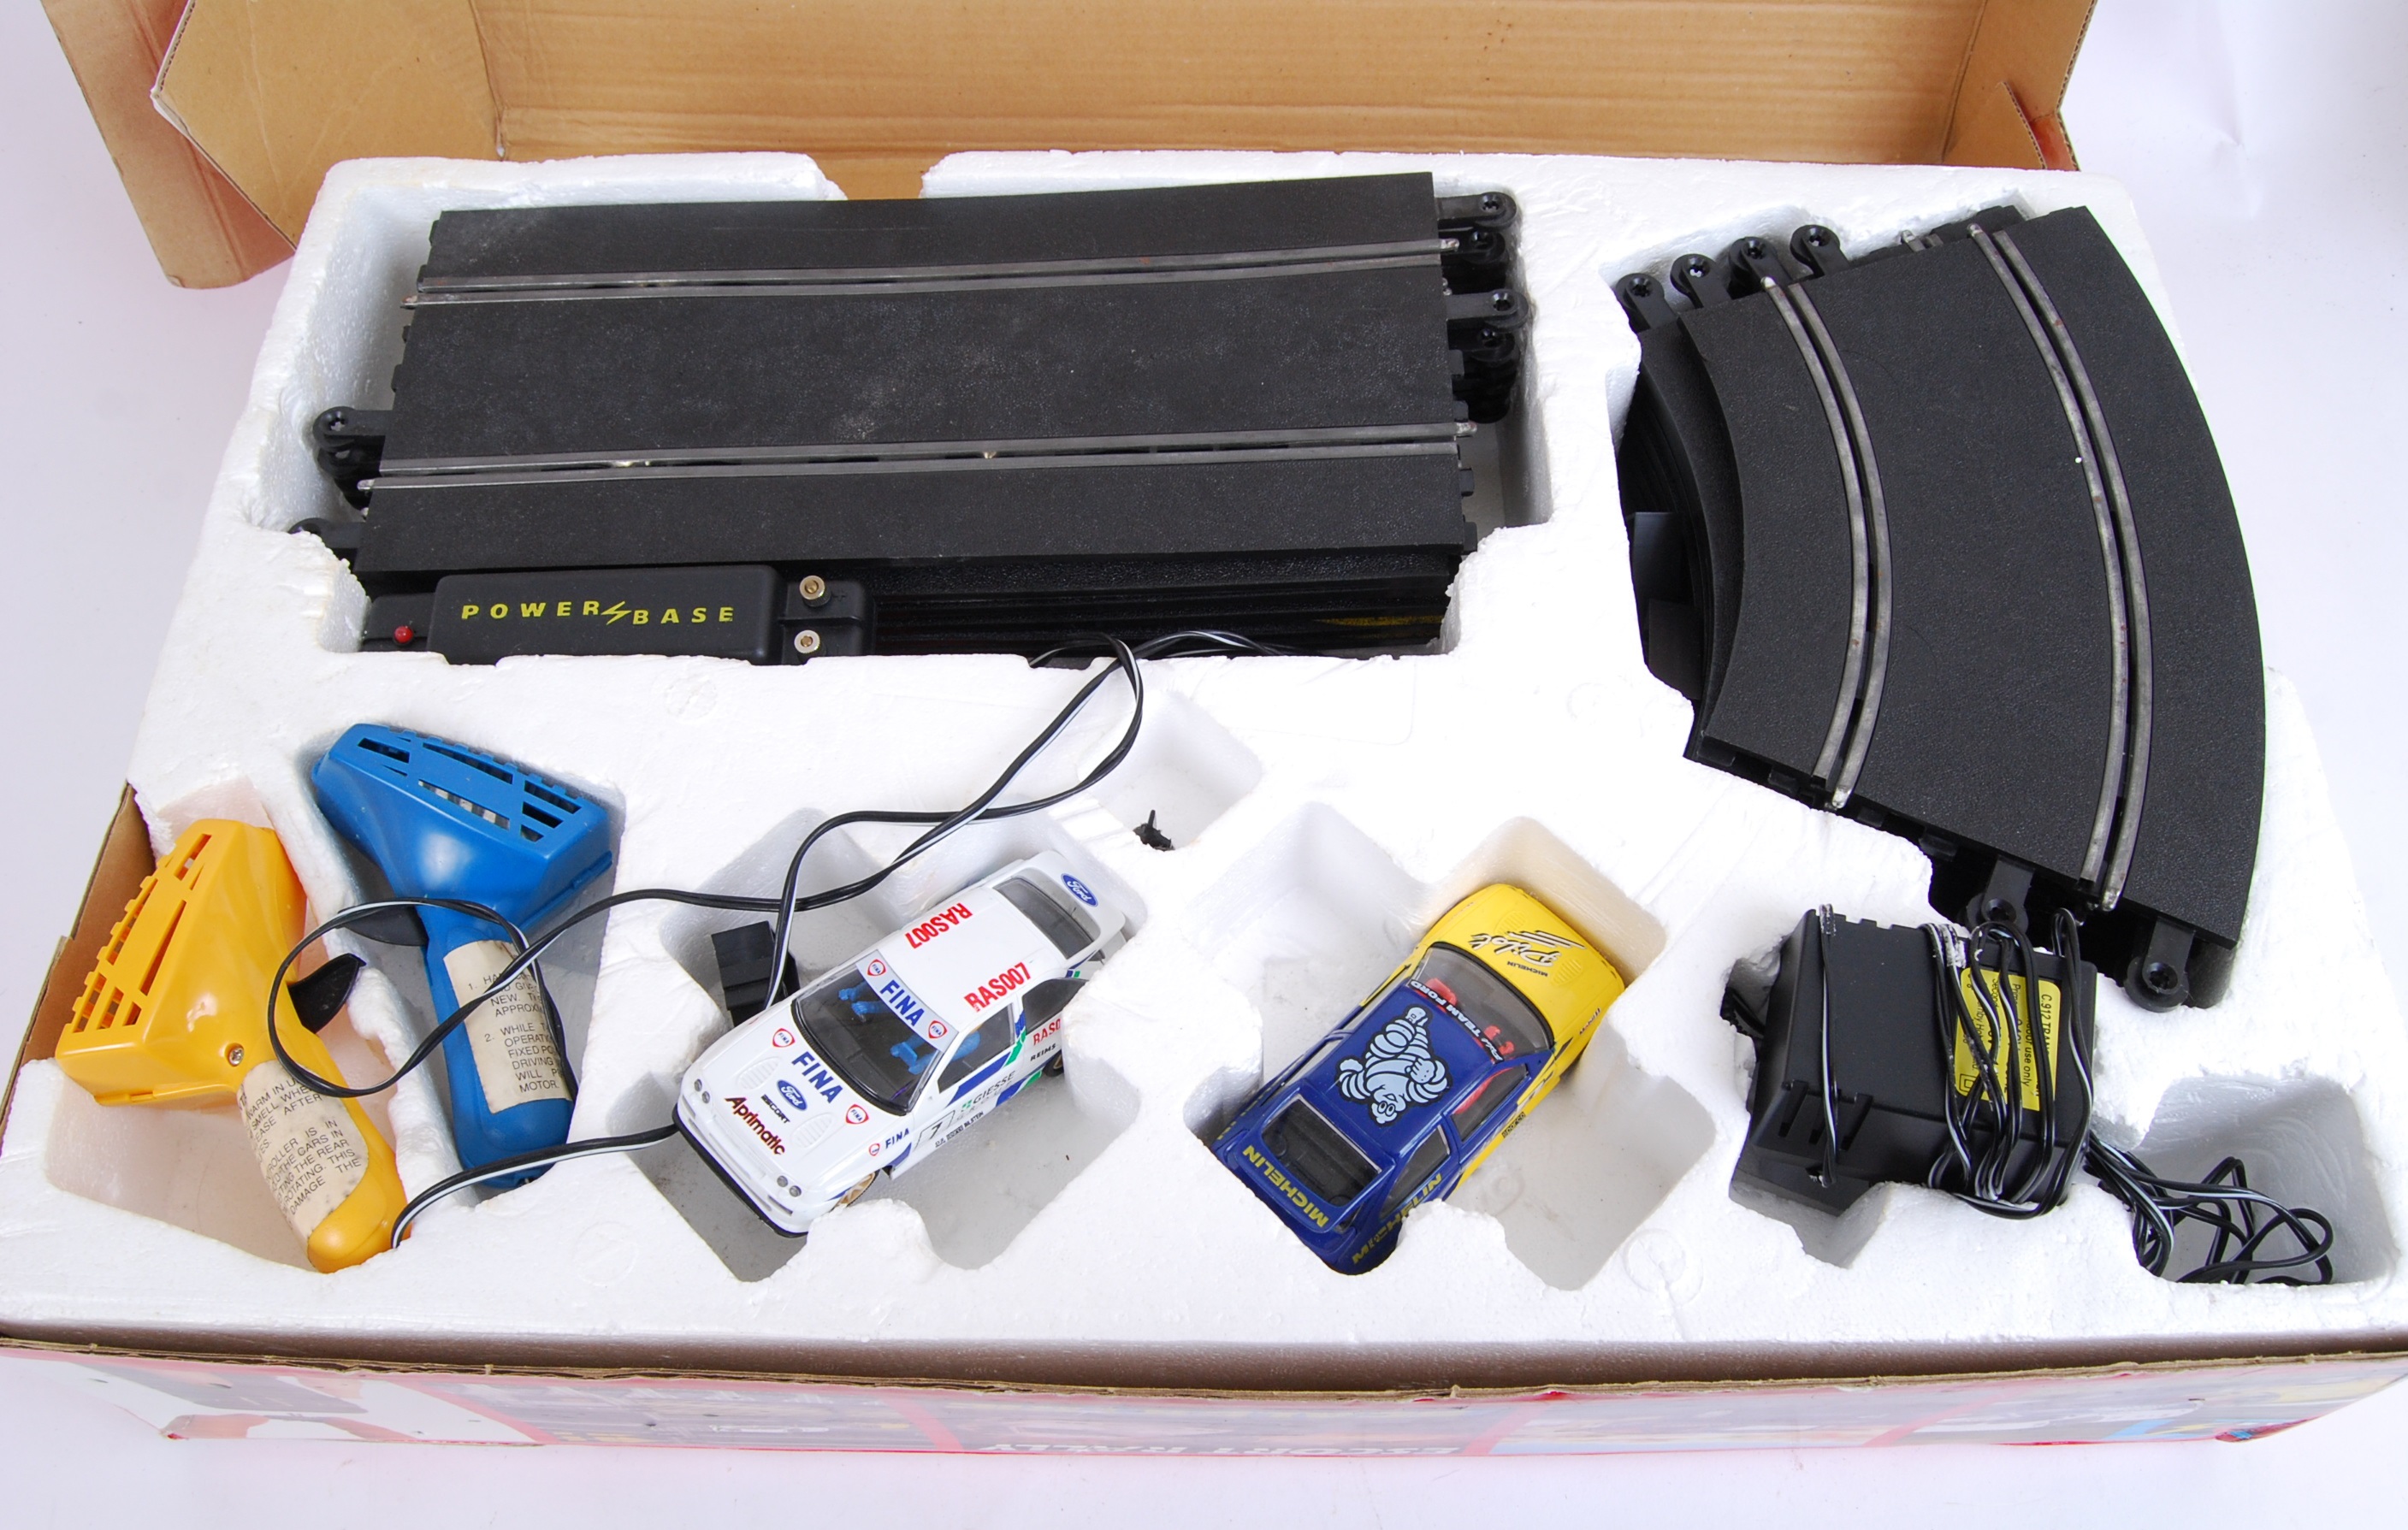 SCALEXTRIC: A Scalextric racing set ' Escort Rally ' appears complete with both cars, controllers, - Image 2 of 3